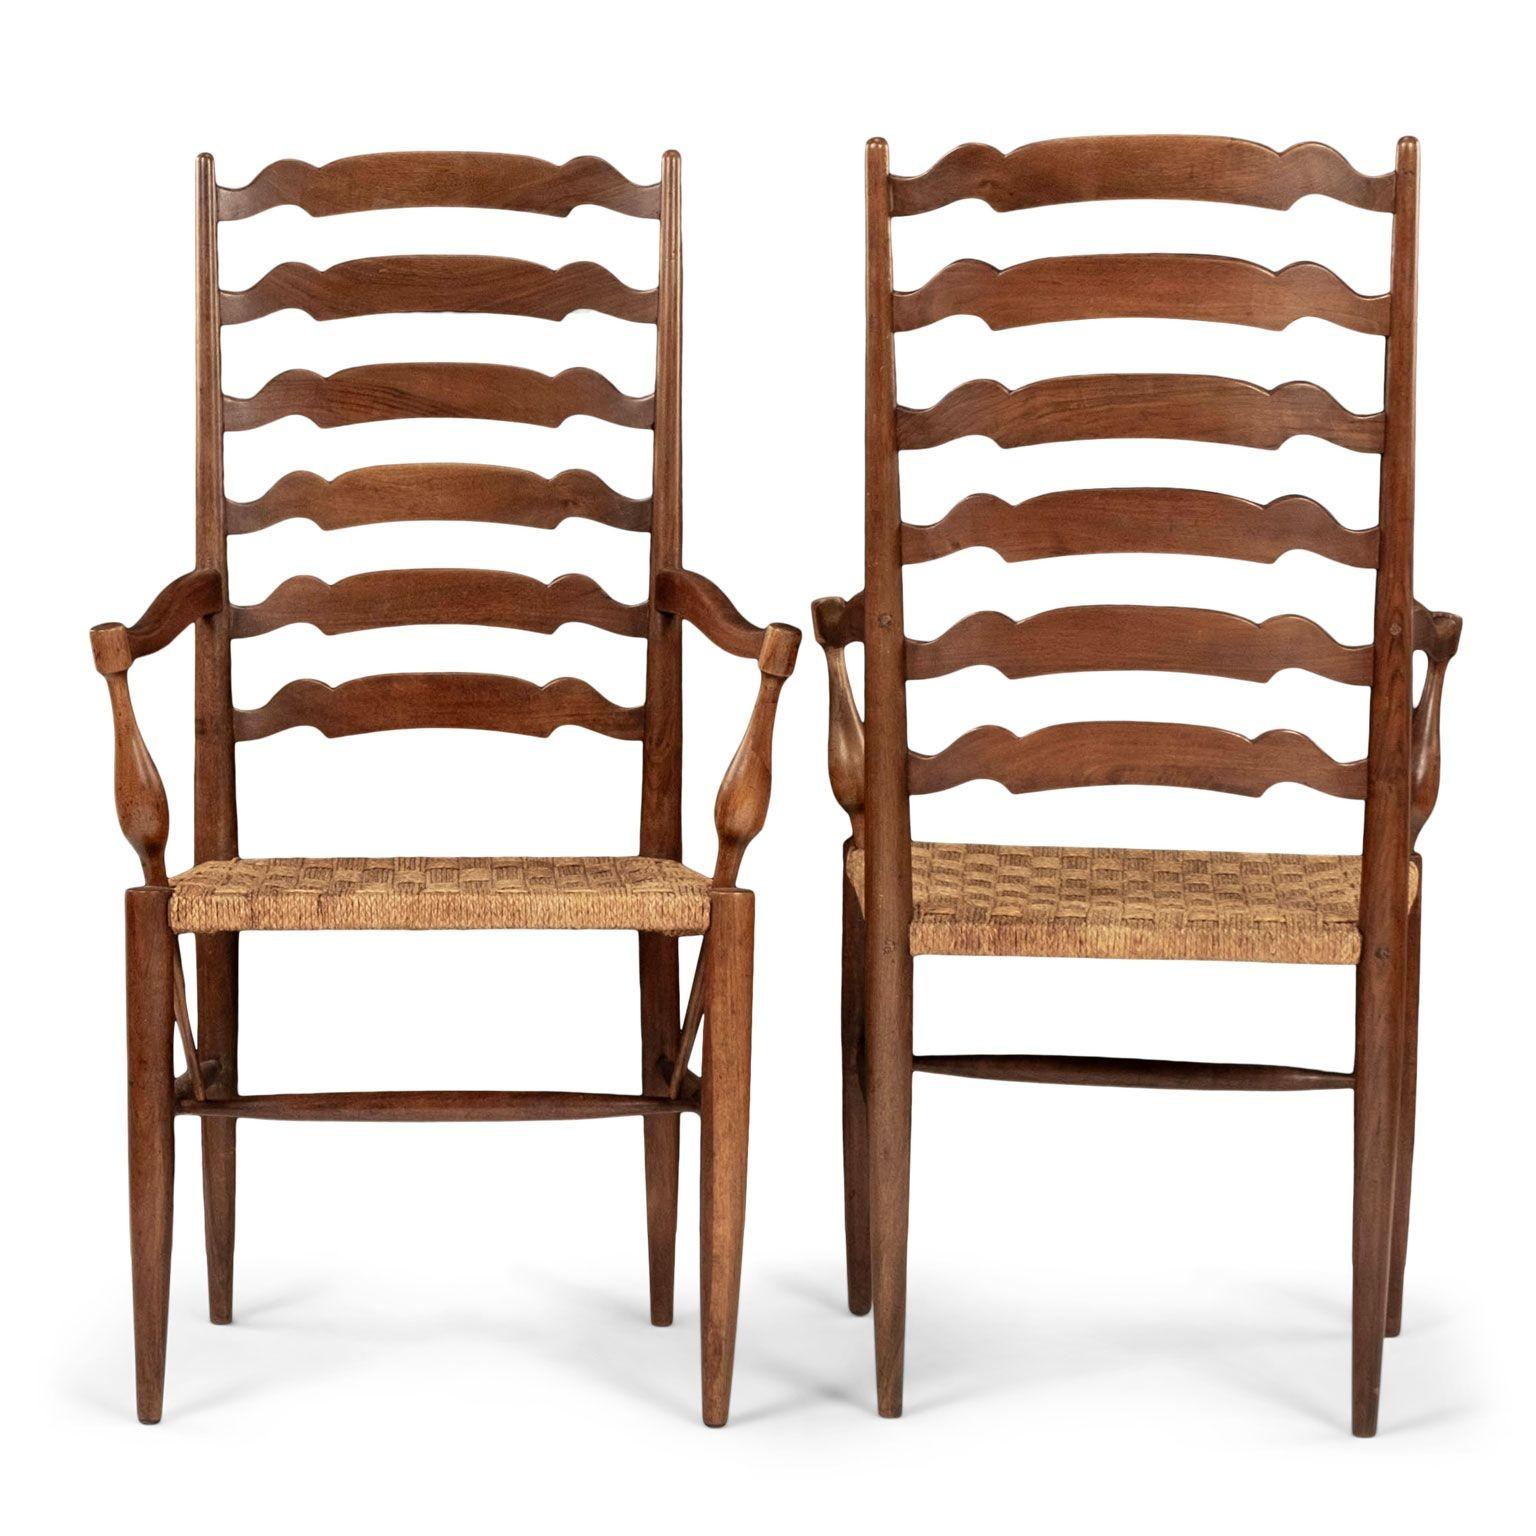 20th Century Pair of Large-Scale Ladder-Back Armchairs Attributed to Paolo Buffa For Sale